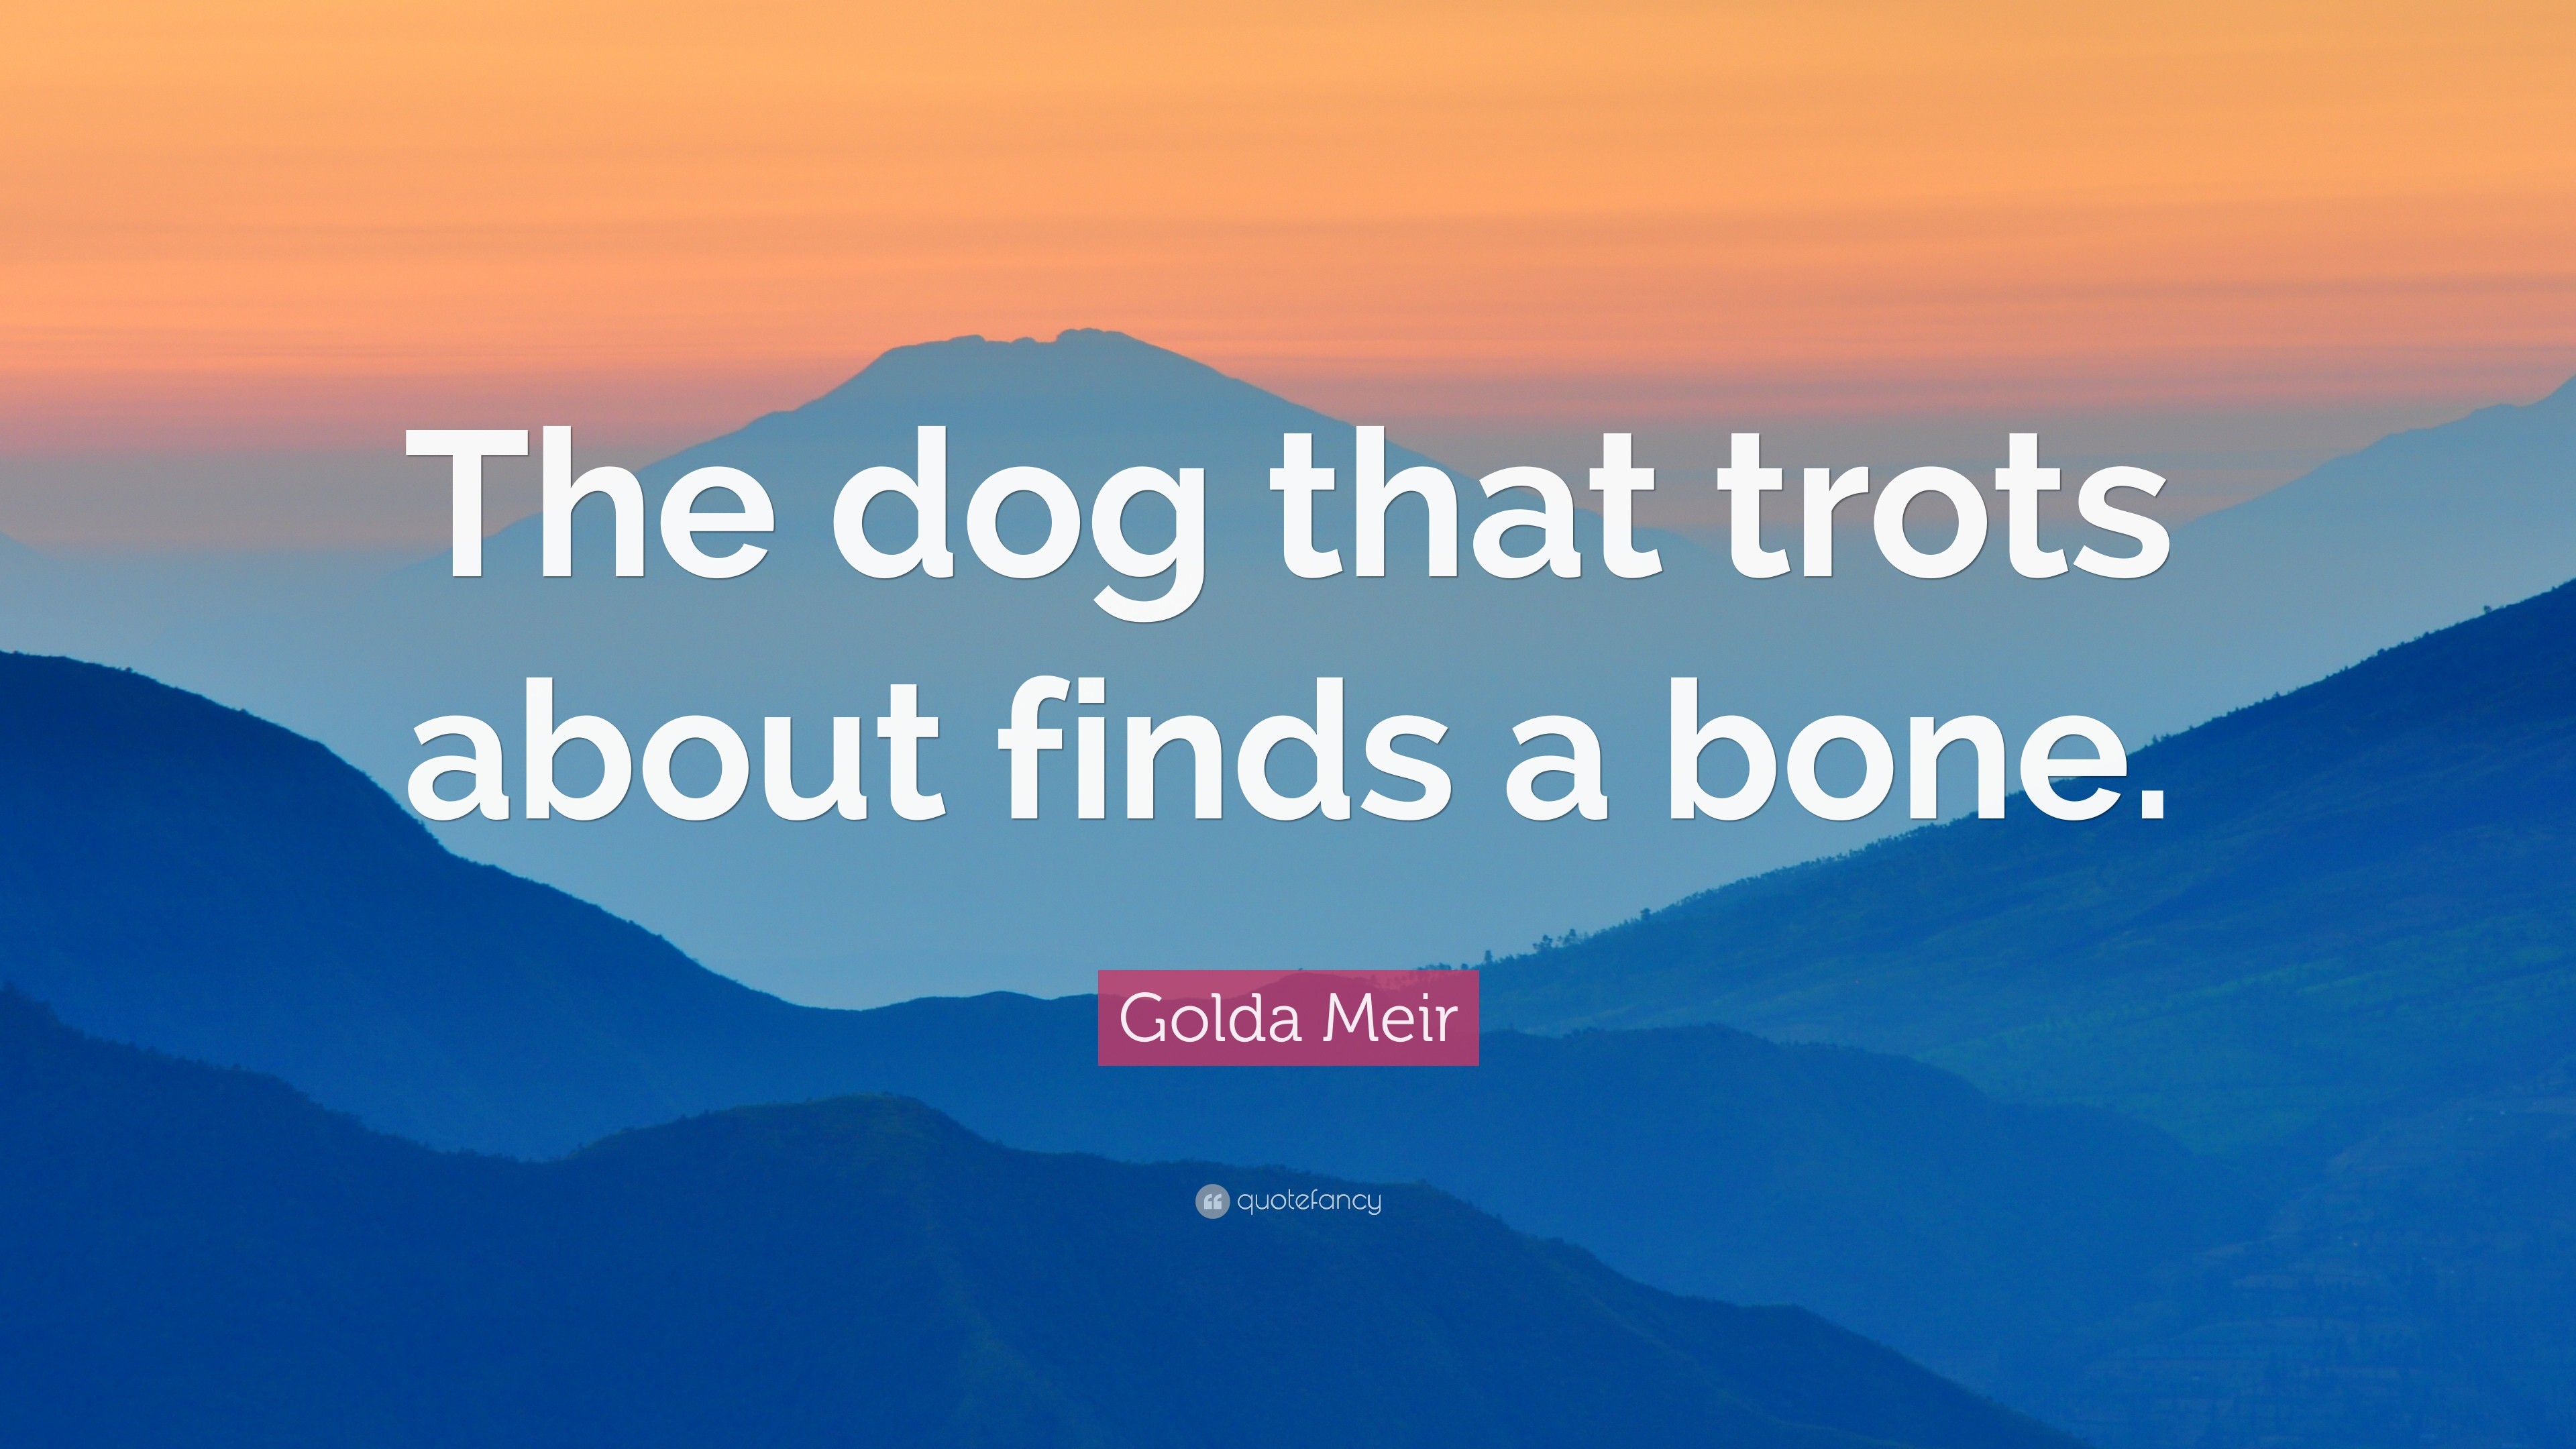 3840x2160 Golda Meir Quote: “The dog that trots about finds a bone.”